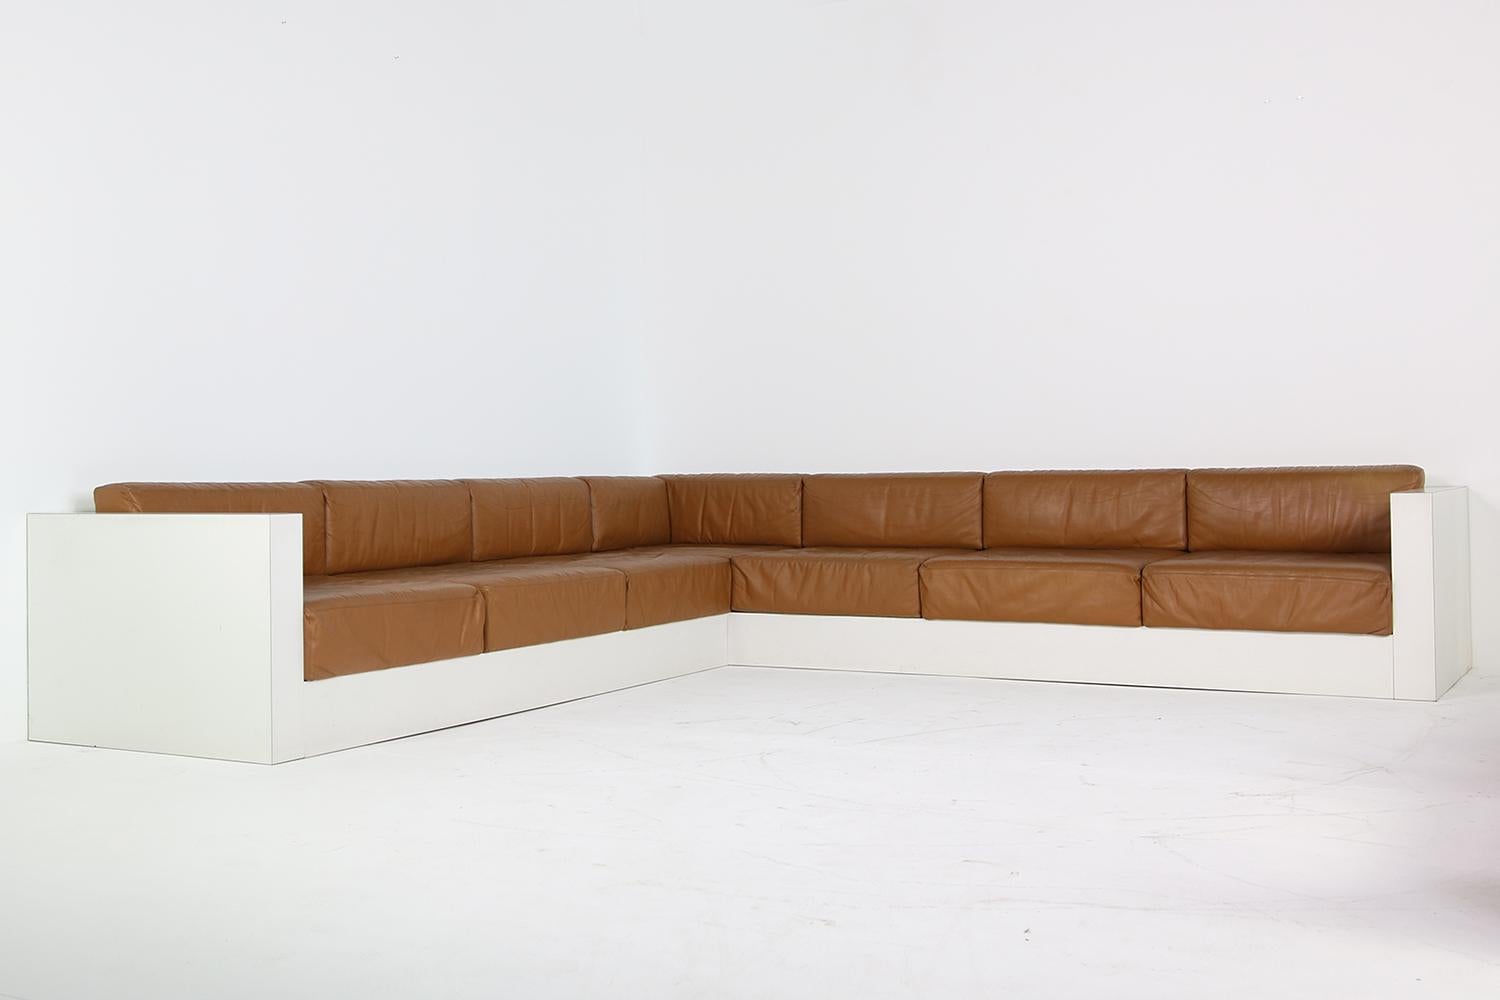 Unique & Large 1960s Landscape Sofa & Chairs Brown Leather Made to Order 1969 For Sale 3